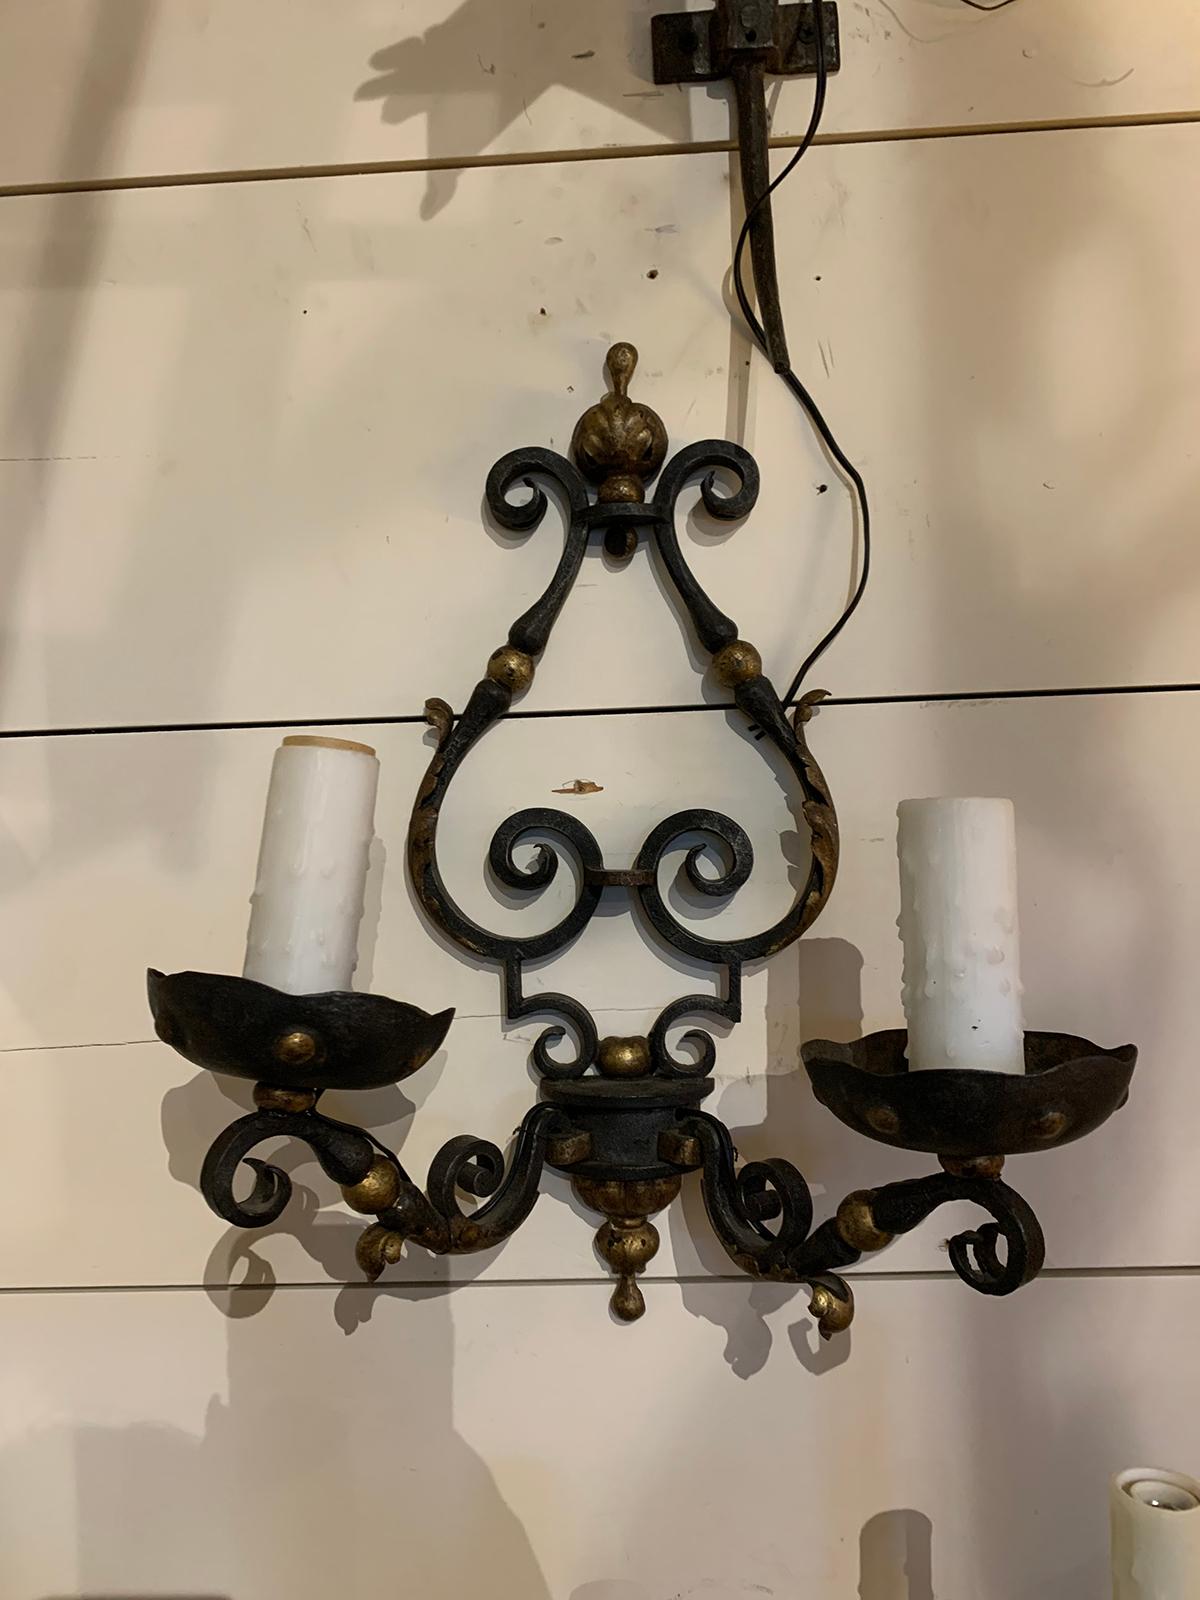 Pair of 19th-20th century French two-arm black iron and gilt sconces
New wiring.